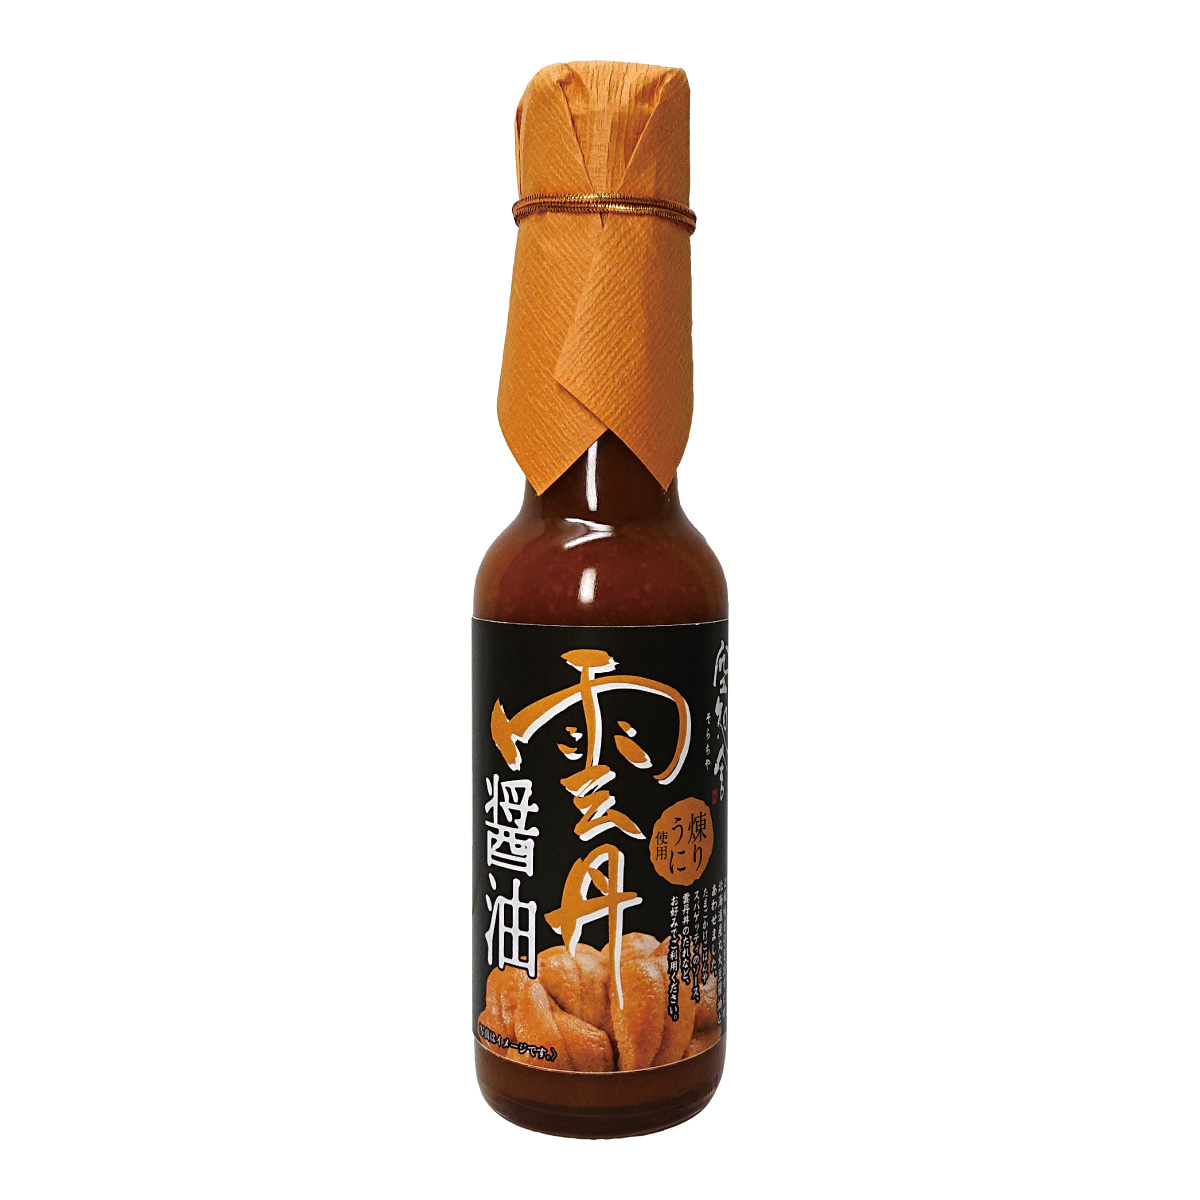  empty .. black. .. soy sauce 150ml... use soy sauce ranking 1 rank acquisition!2020 year Japan gift large . Hokkaido . winning!. . un- possible gift correspondence un- possible 